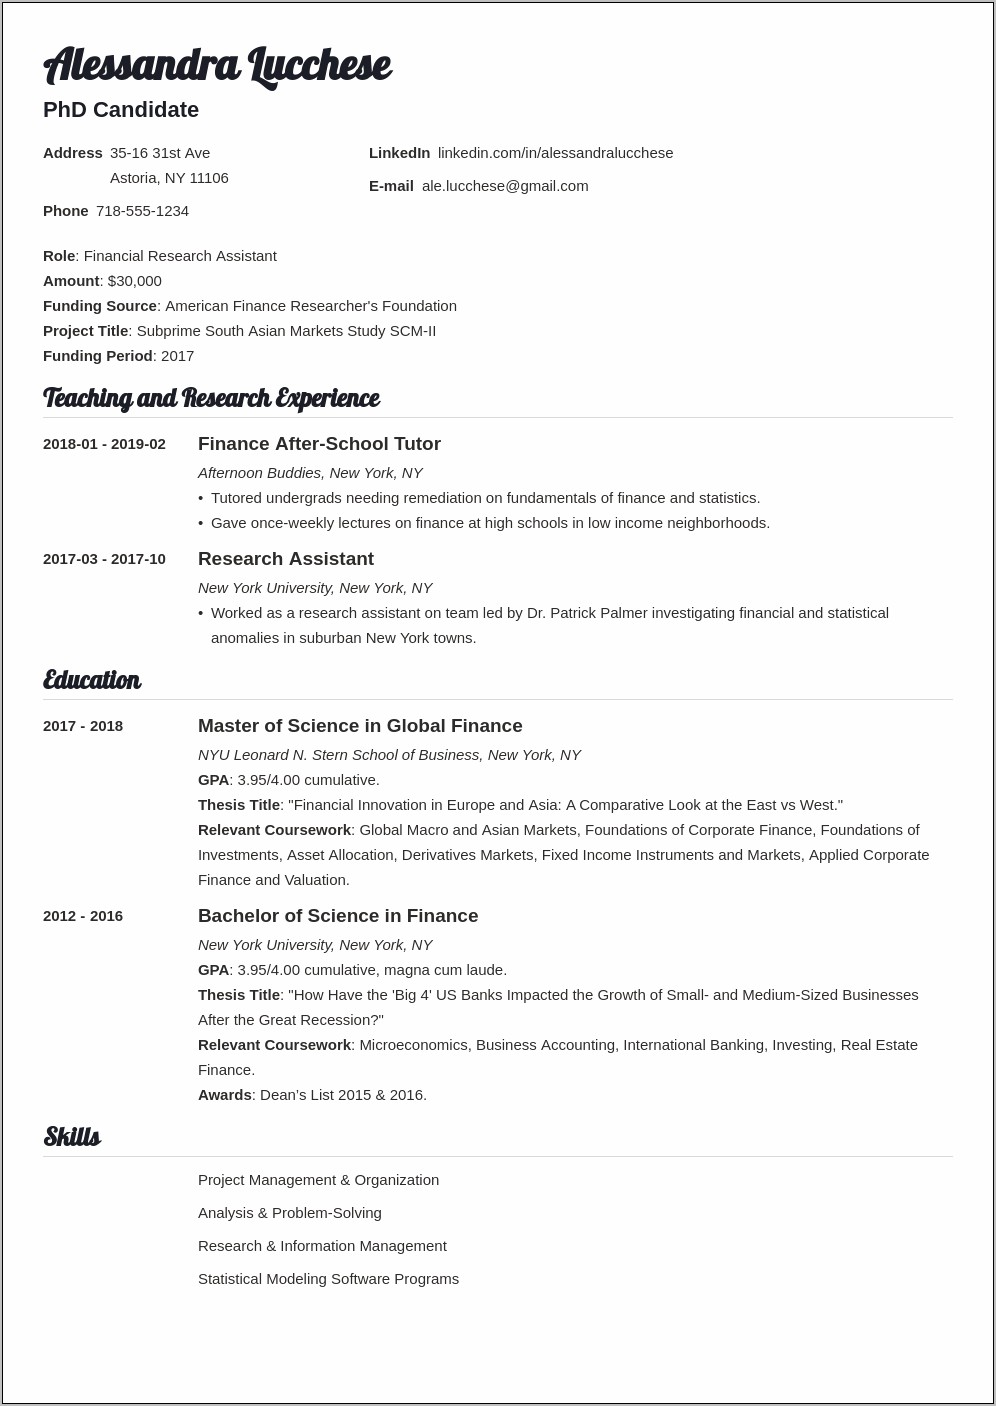 Sample Resumes With Masters Degrees